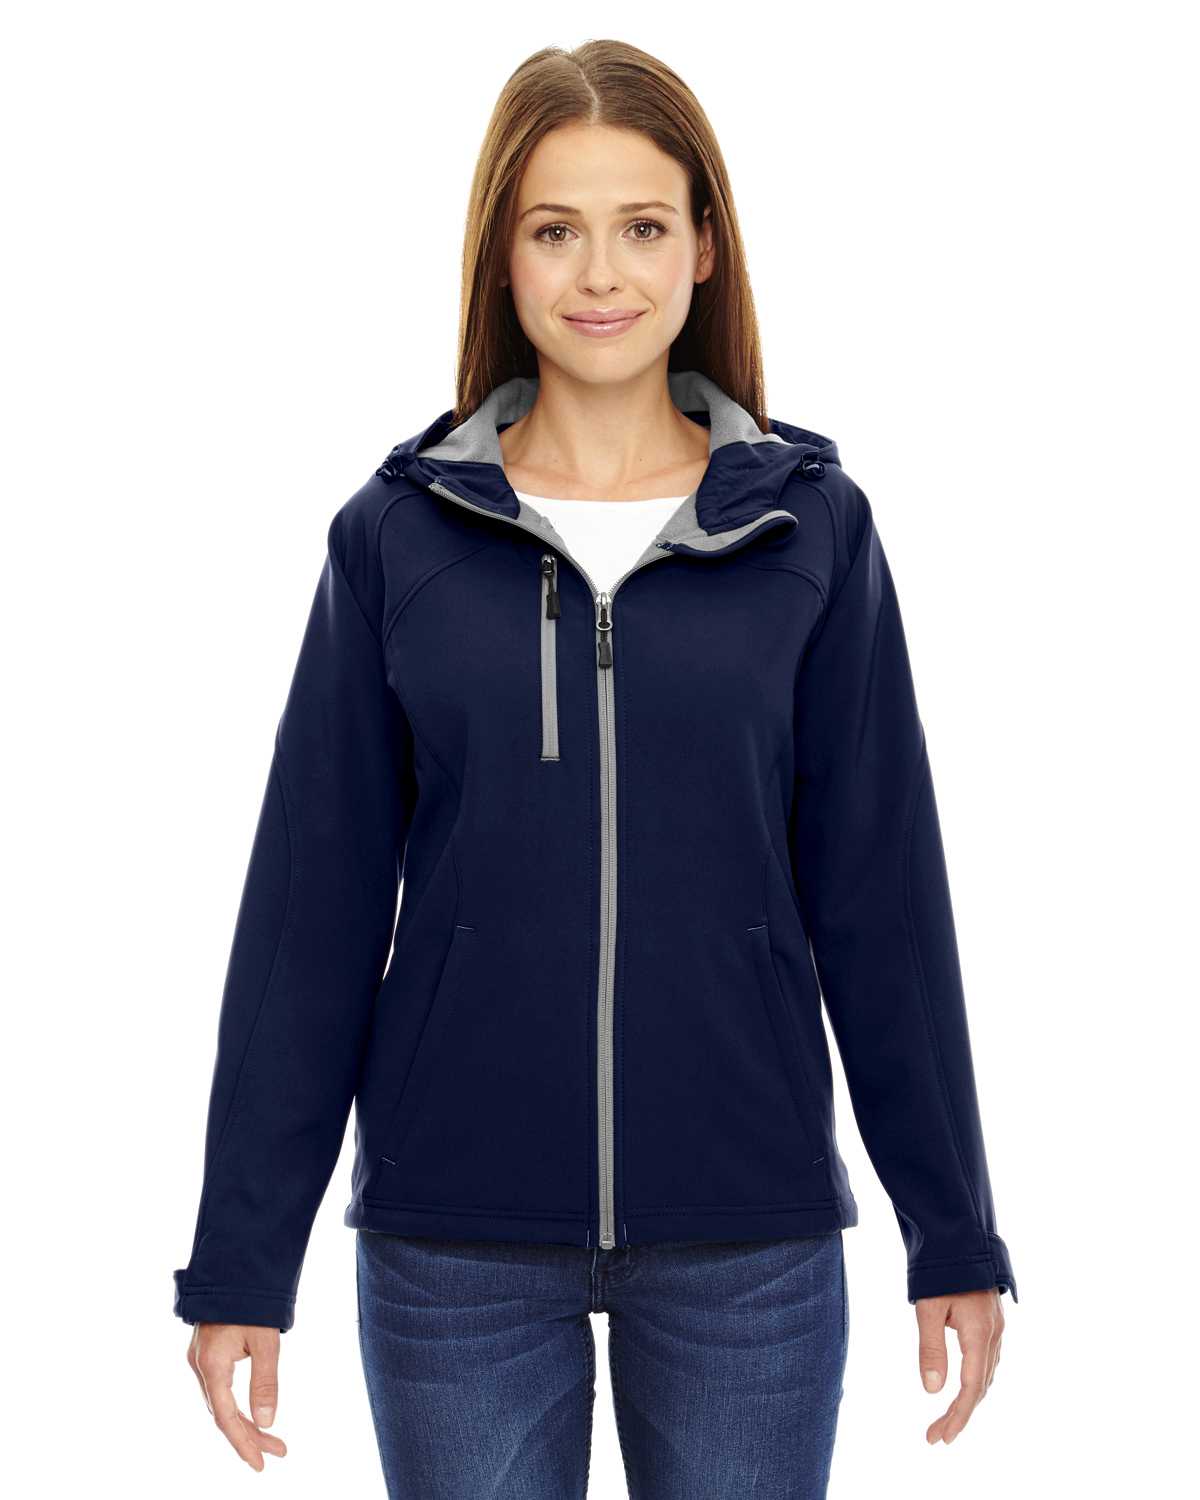 North End 78166 Ladies' Prospect Two-Layer Fleece Bonded Soft Shell ...